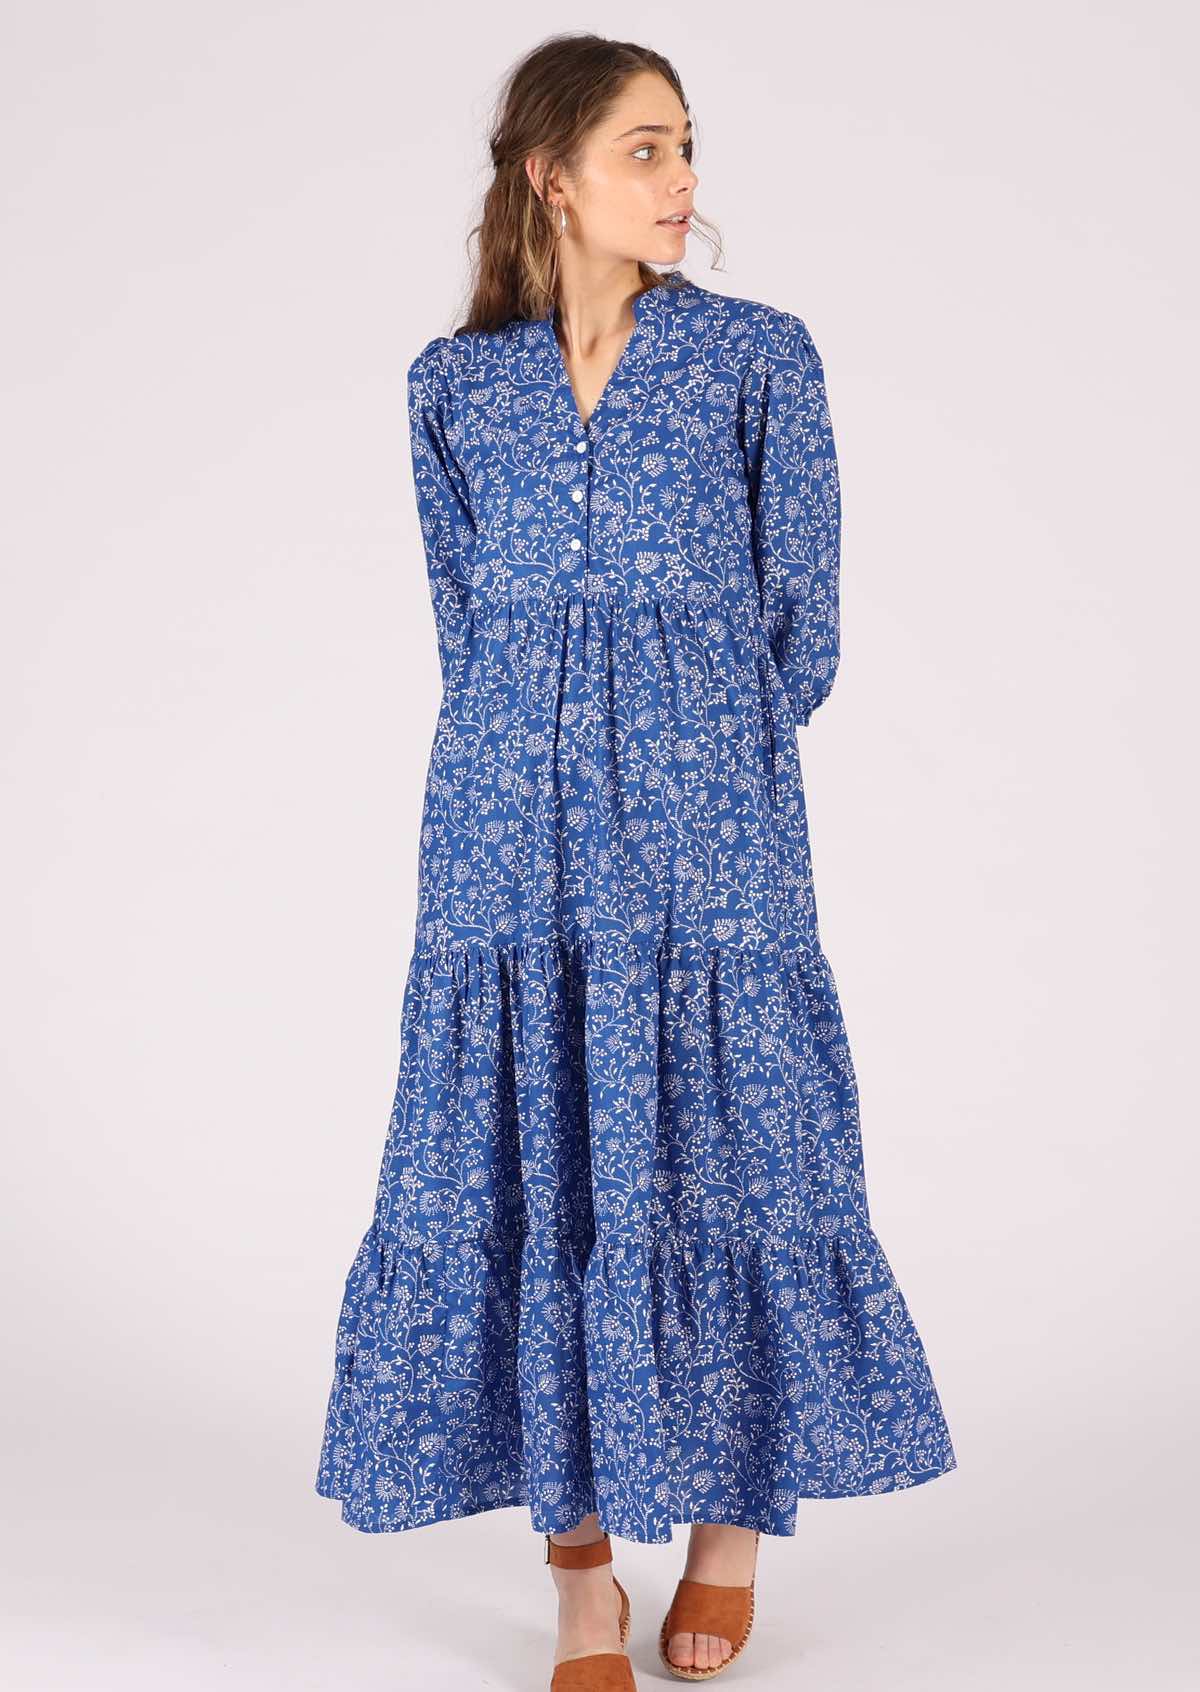 Cotton maxi dress with collar and buttoned bodice